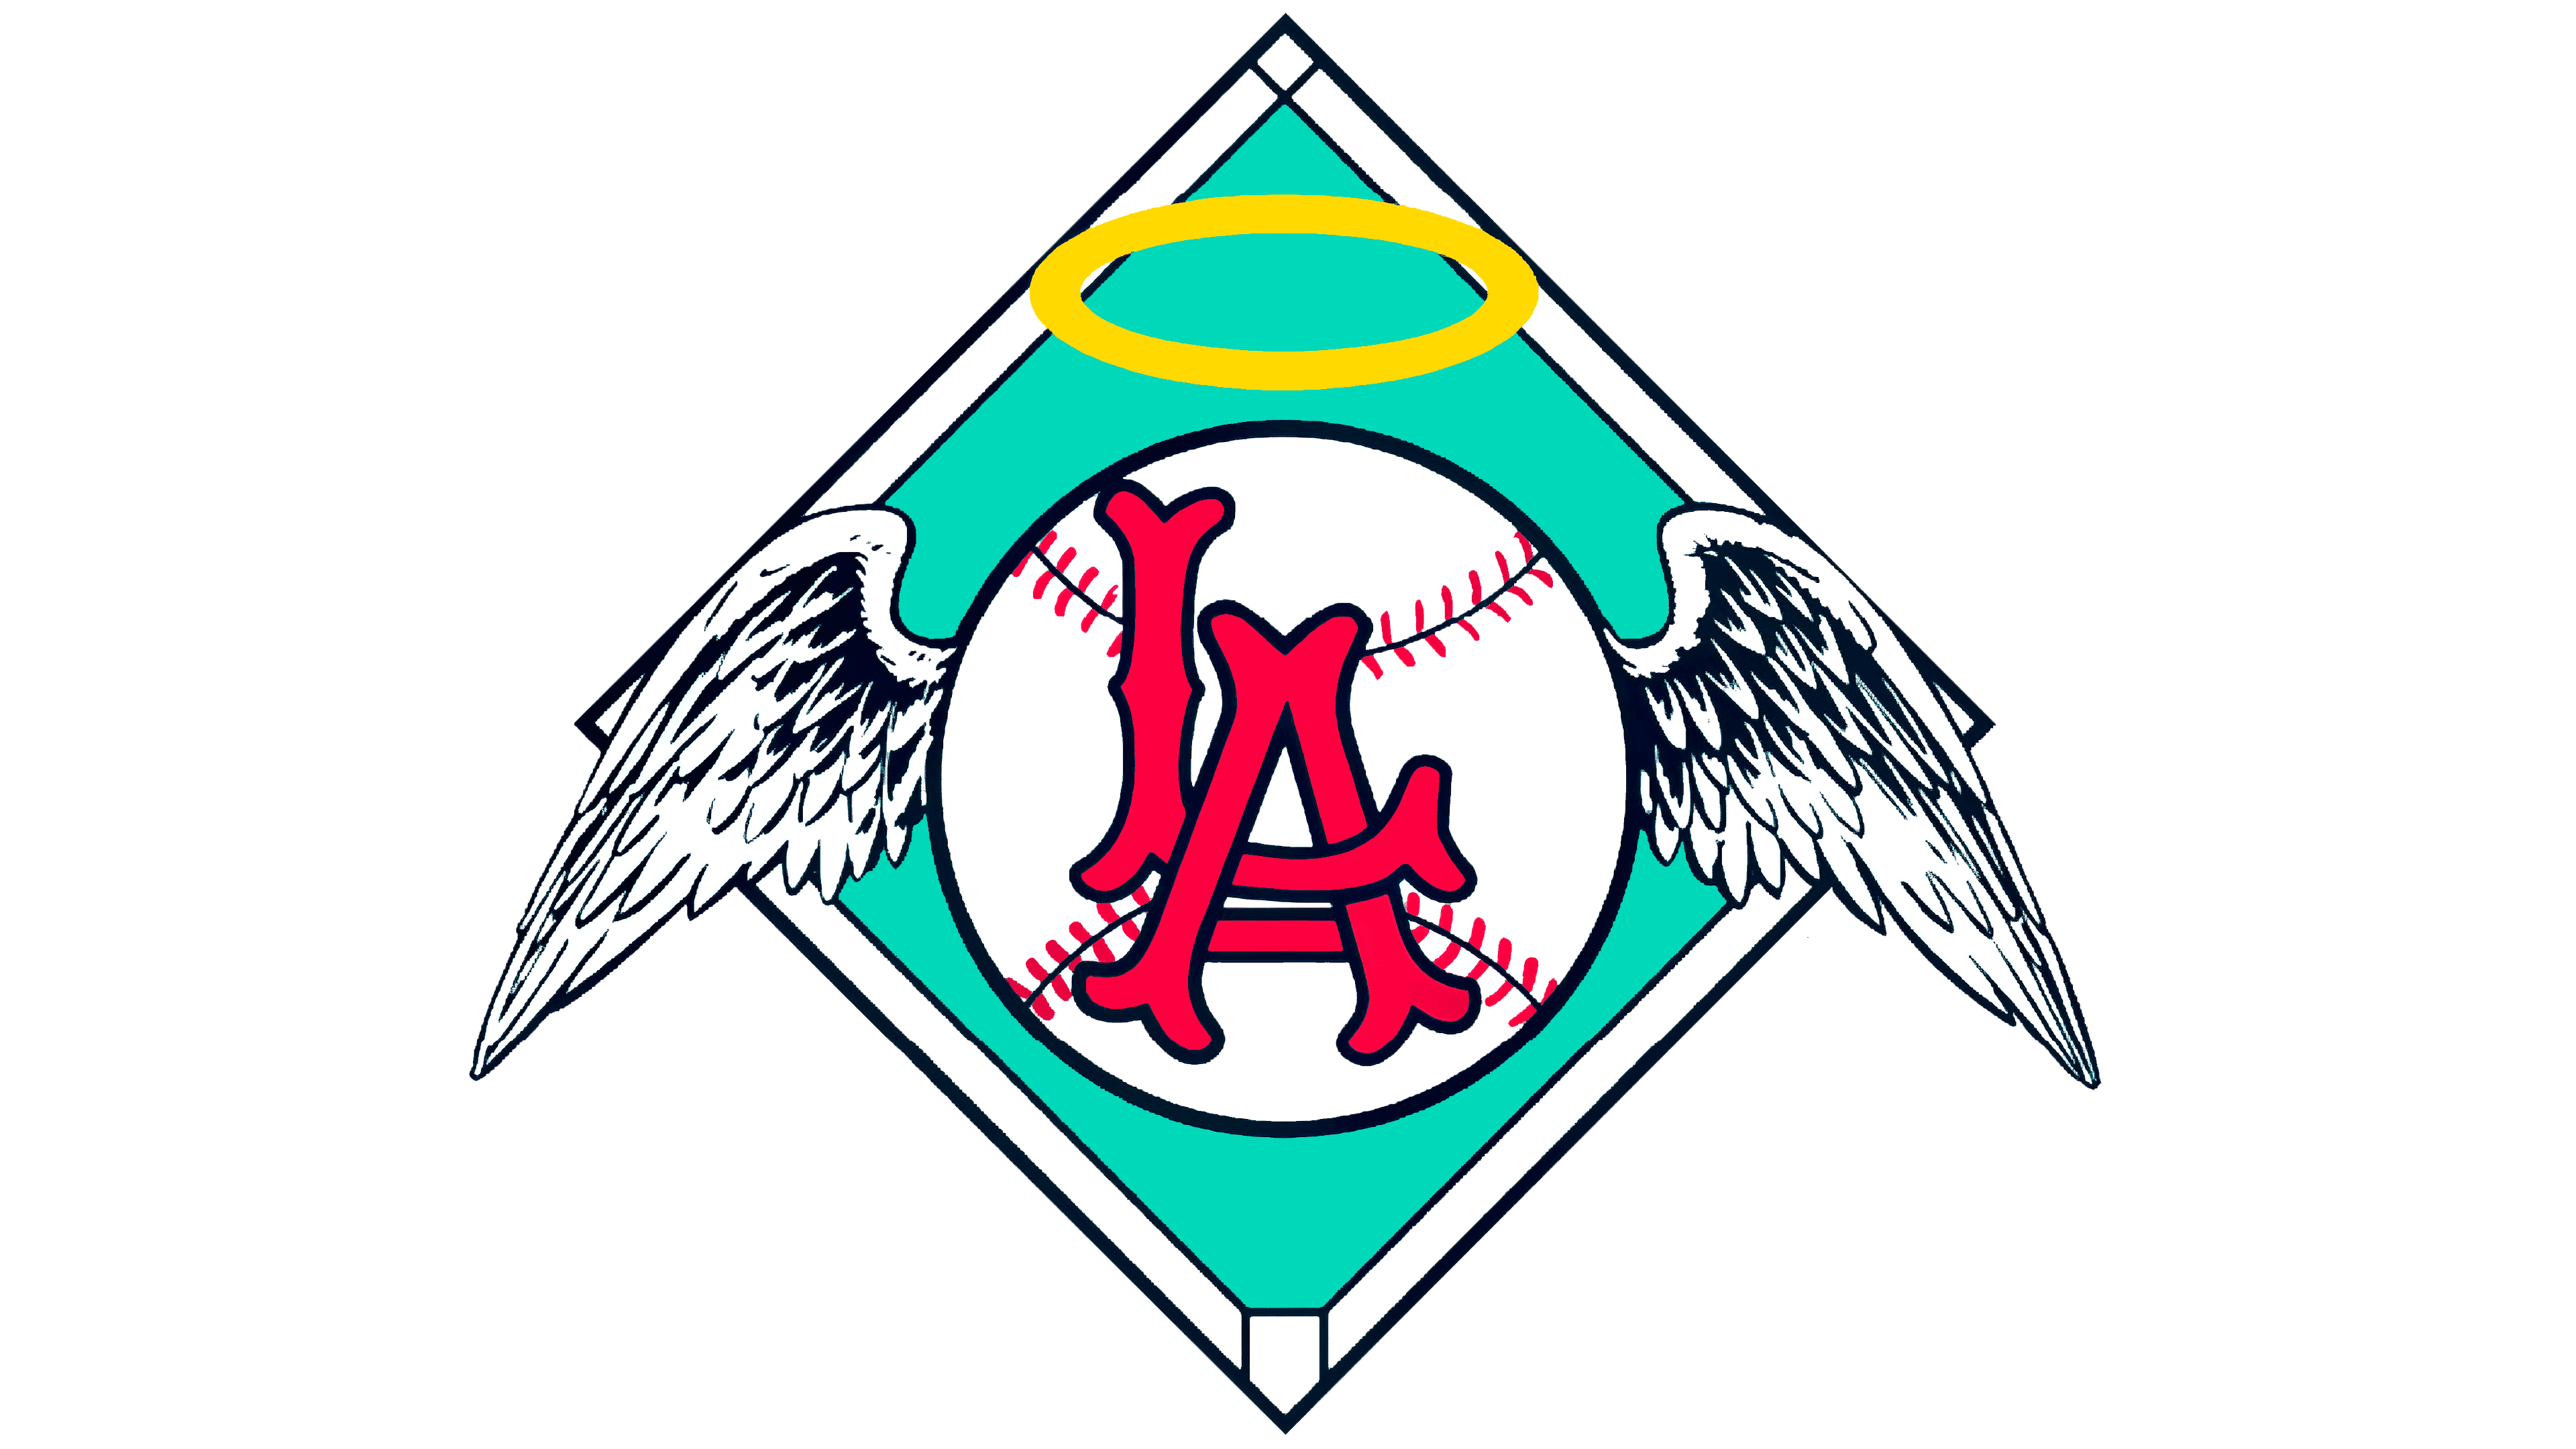 Los Angeles Angels of Anaheim Logo and symbol, meaning, history, PNG, brand